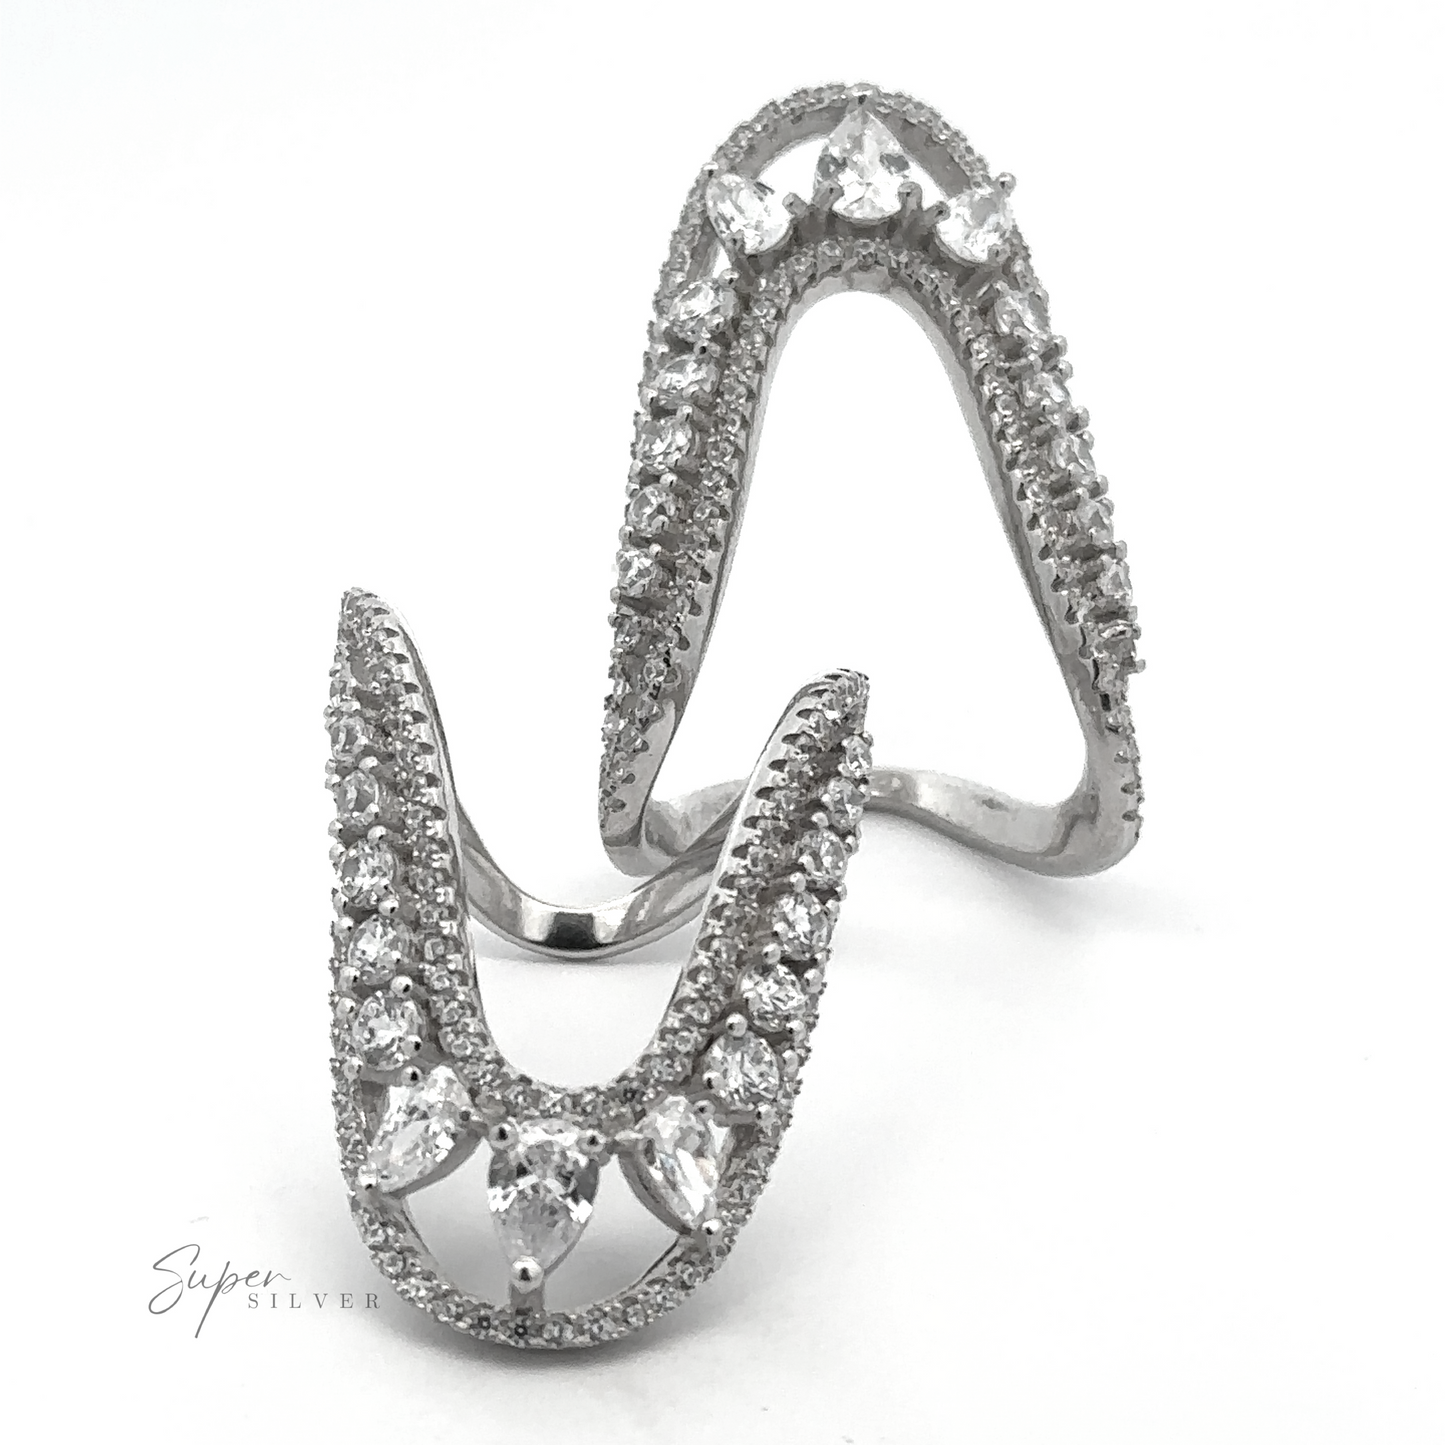 
                  
                    Two Long "U" CZ Rings with V-shaped designs, encrusted with small clear cubic zirconia gemstones and larger pear-shaped stones. These unique rings are positioned upright and diagonally against a plain white backdrop.
                  
                